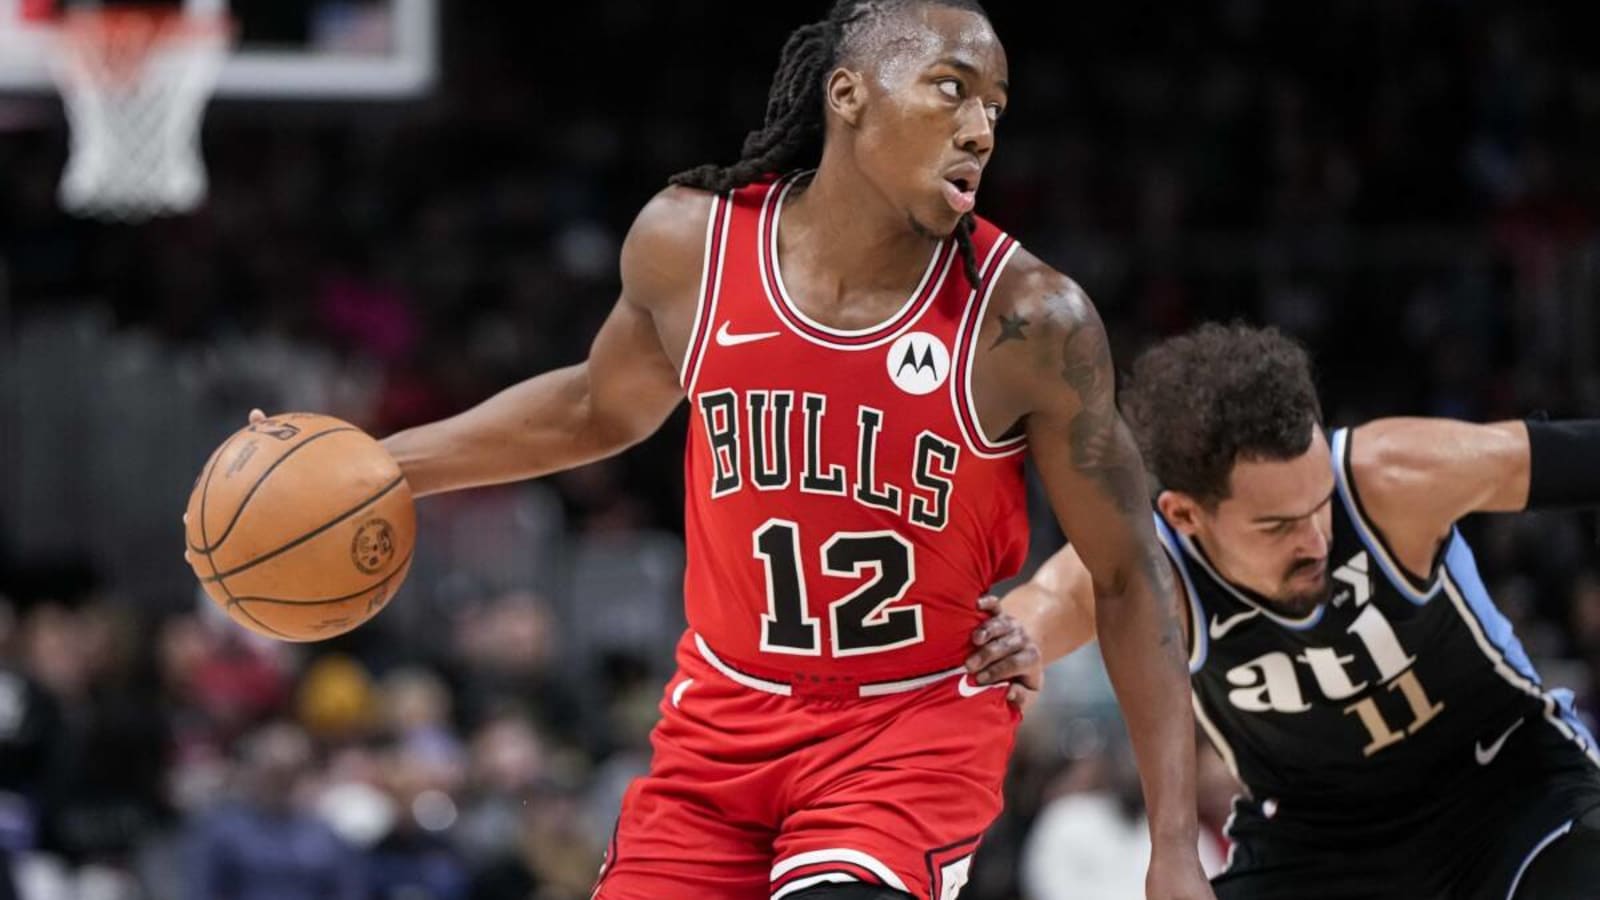 The report points to Ayo Dosunmu as the Chicago Bulls&#39; &#39;hidden gem&#39;